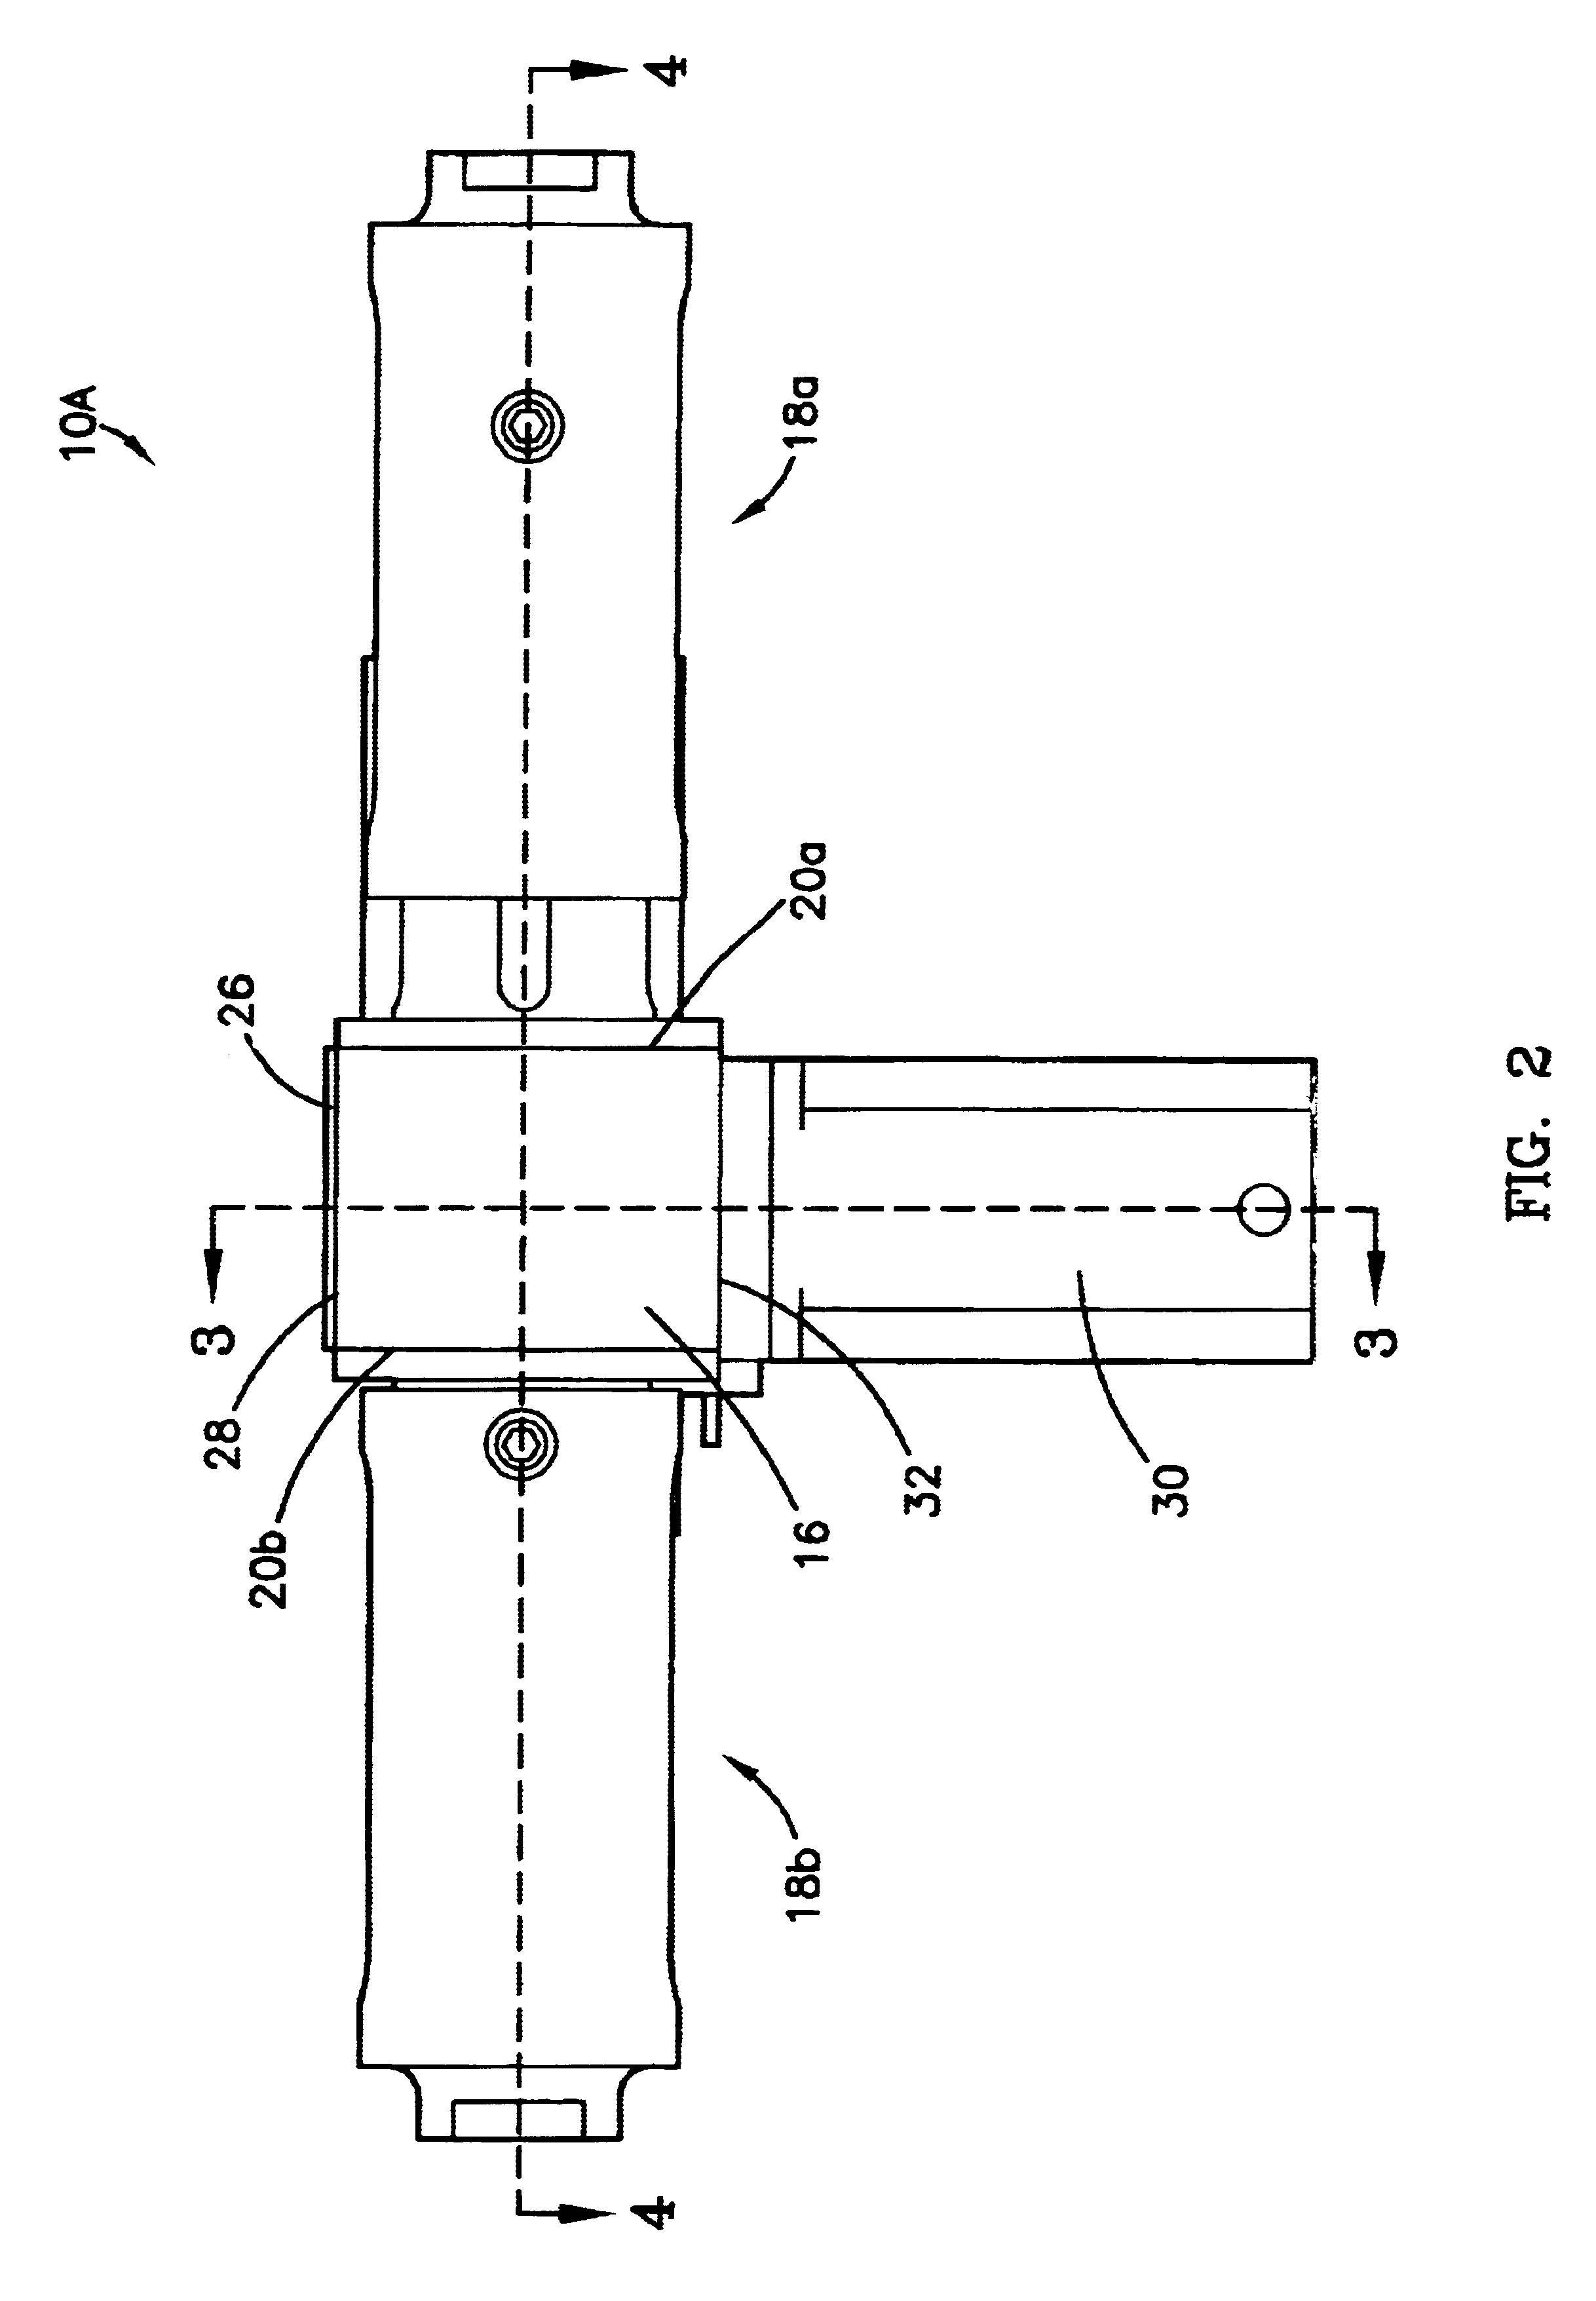 Linear control loading system